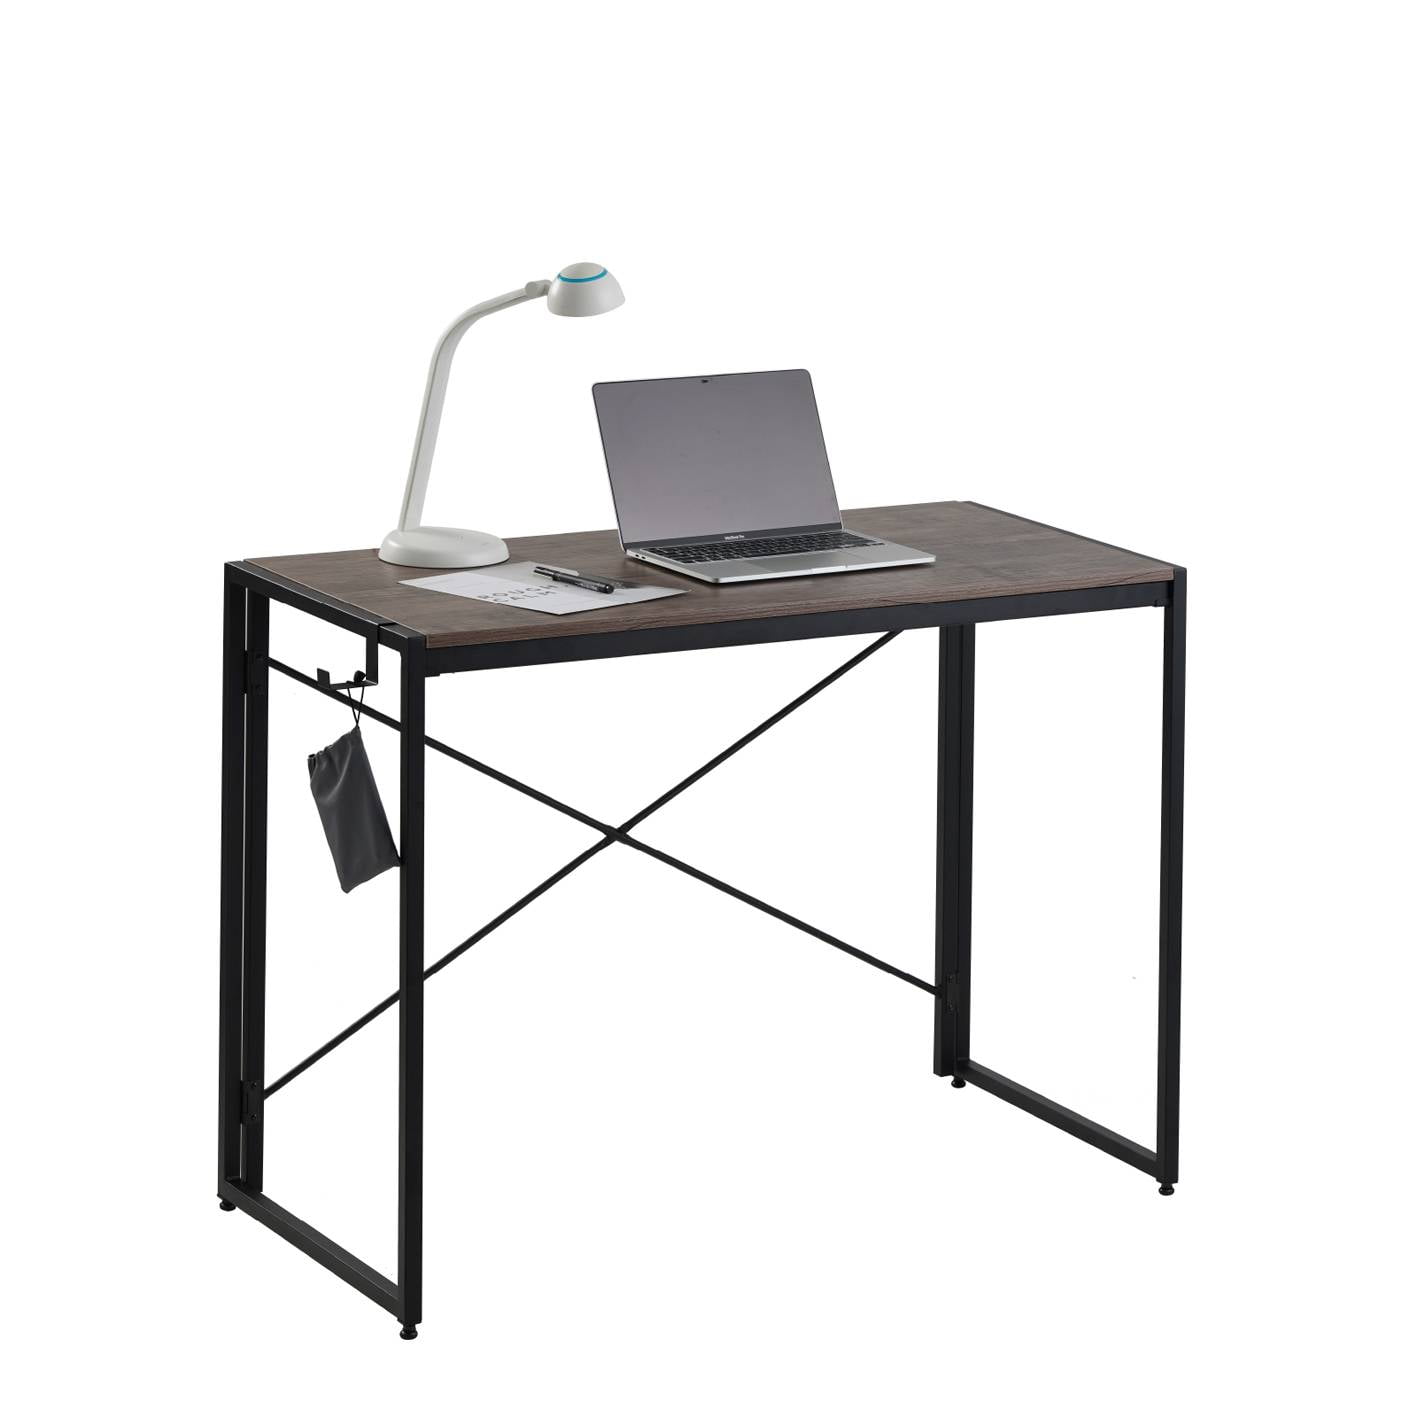 Ship from USA Directly Chenway Computer Desk Modern Simple Study Desk Adjustable Laptop Table for Home Office Notebook Desk,80cm50cm